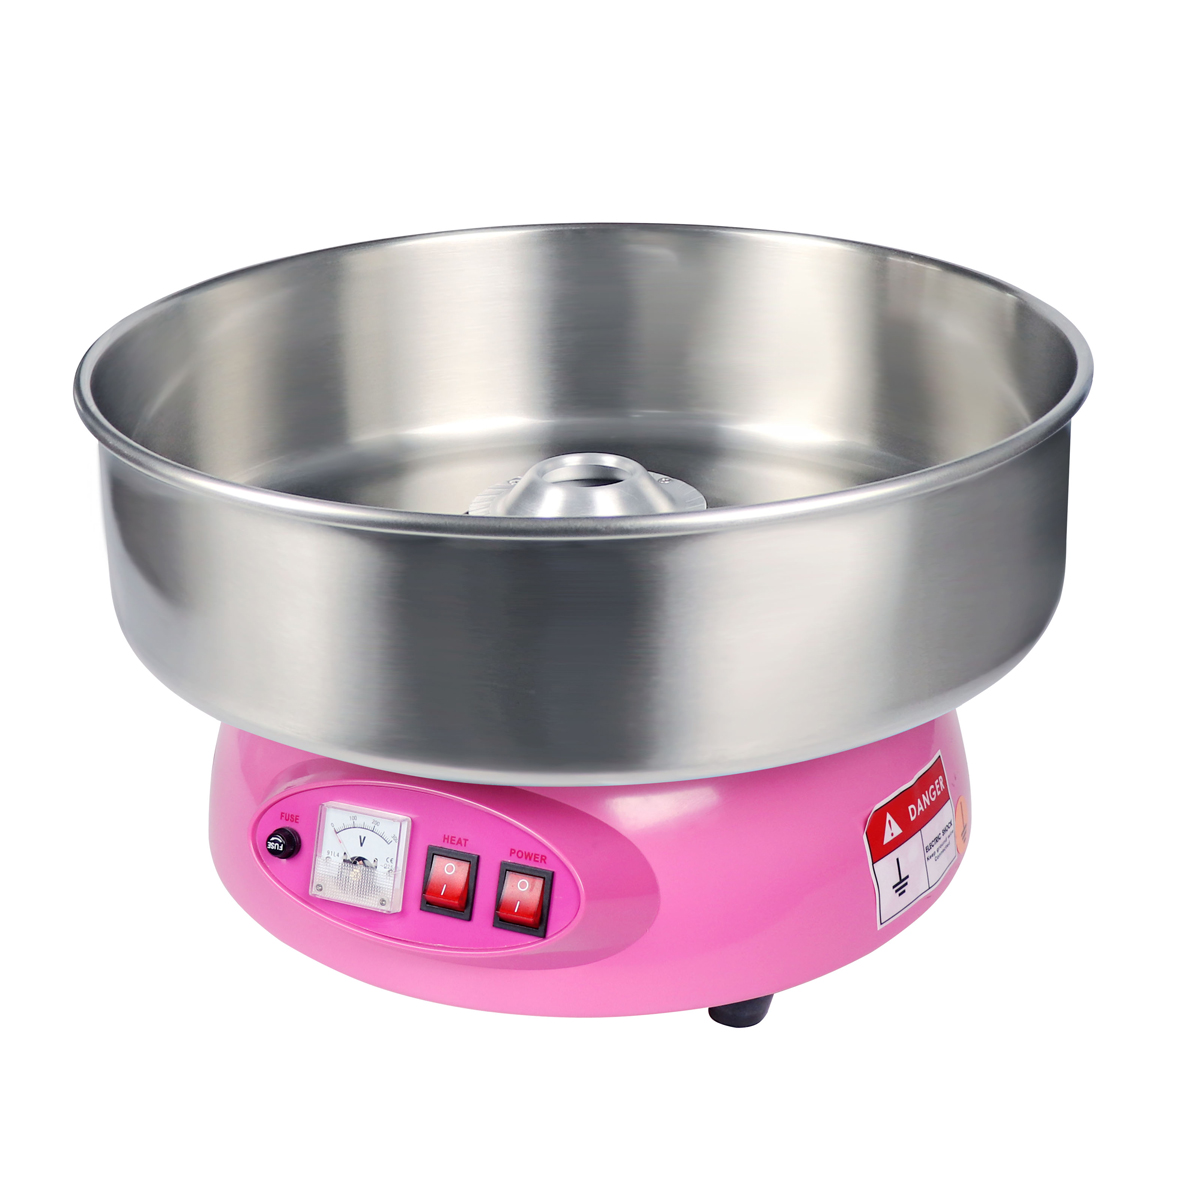 PartyHut Compact Commercial Cotton Candy Machine Party Candy Floss Maker Pink